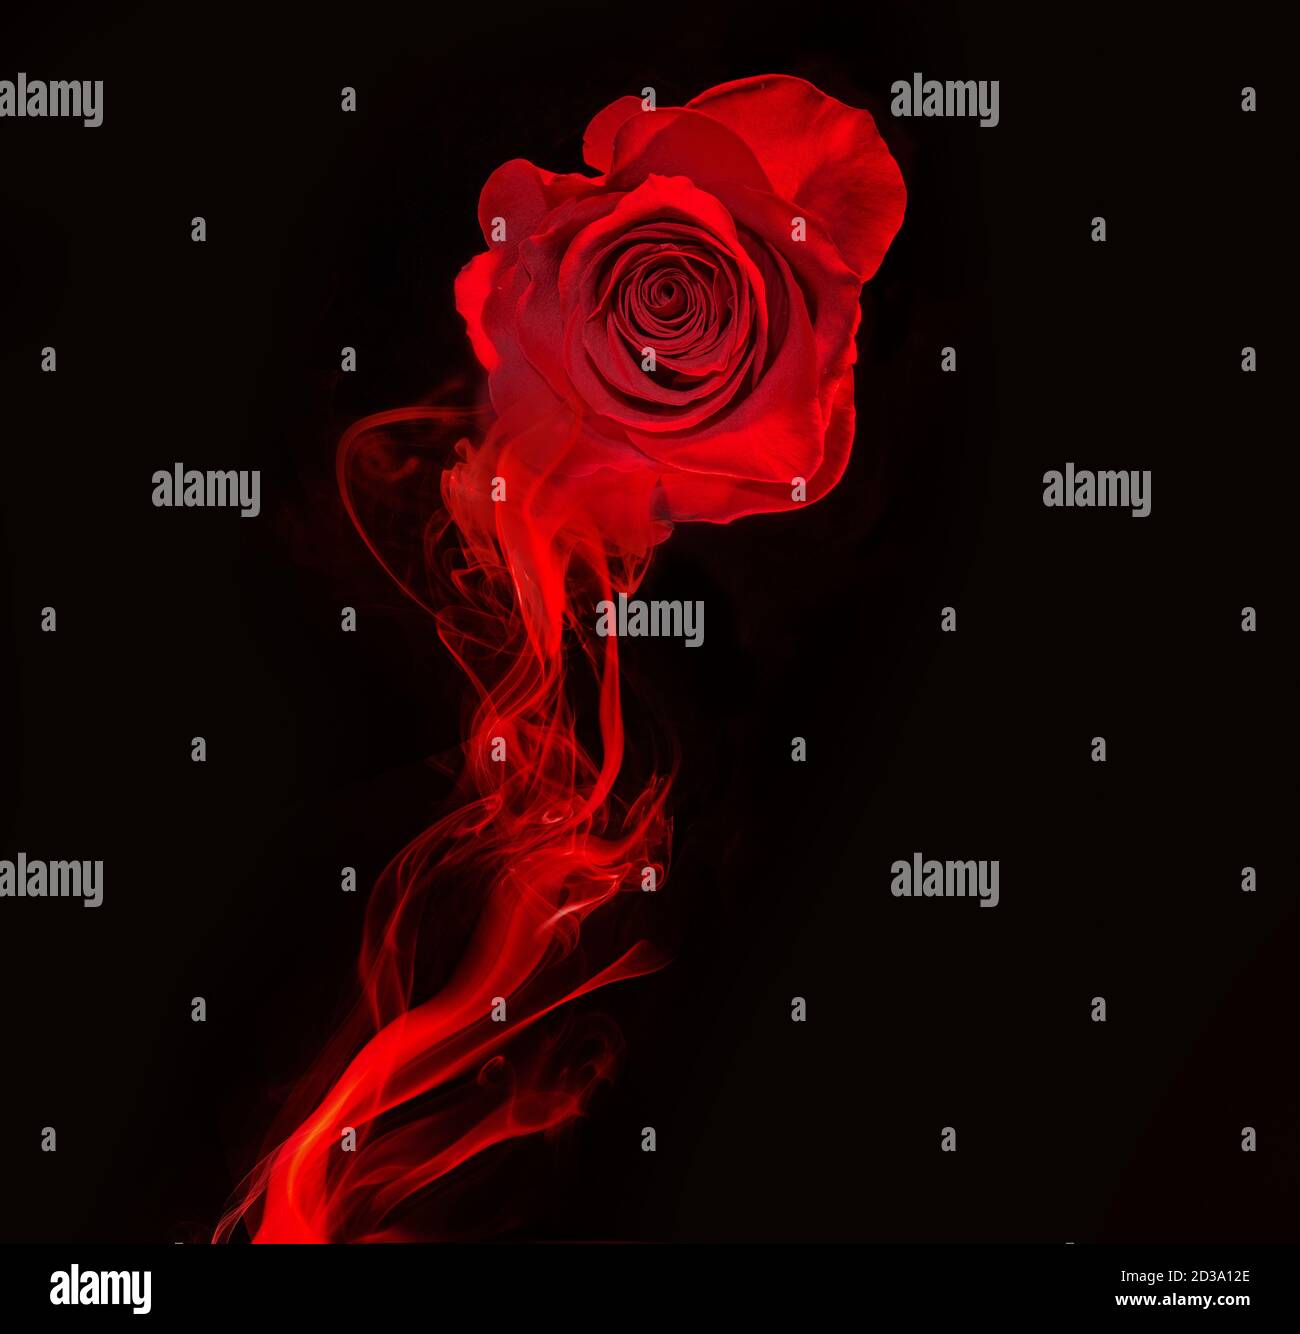 rose and swirl of red smoke isolated on black background Stock Photo